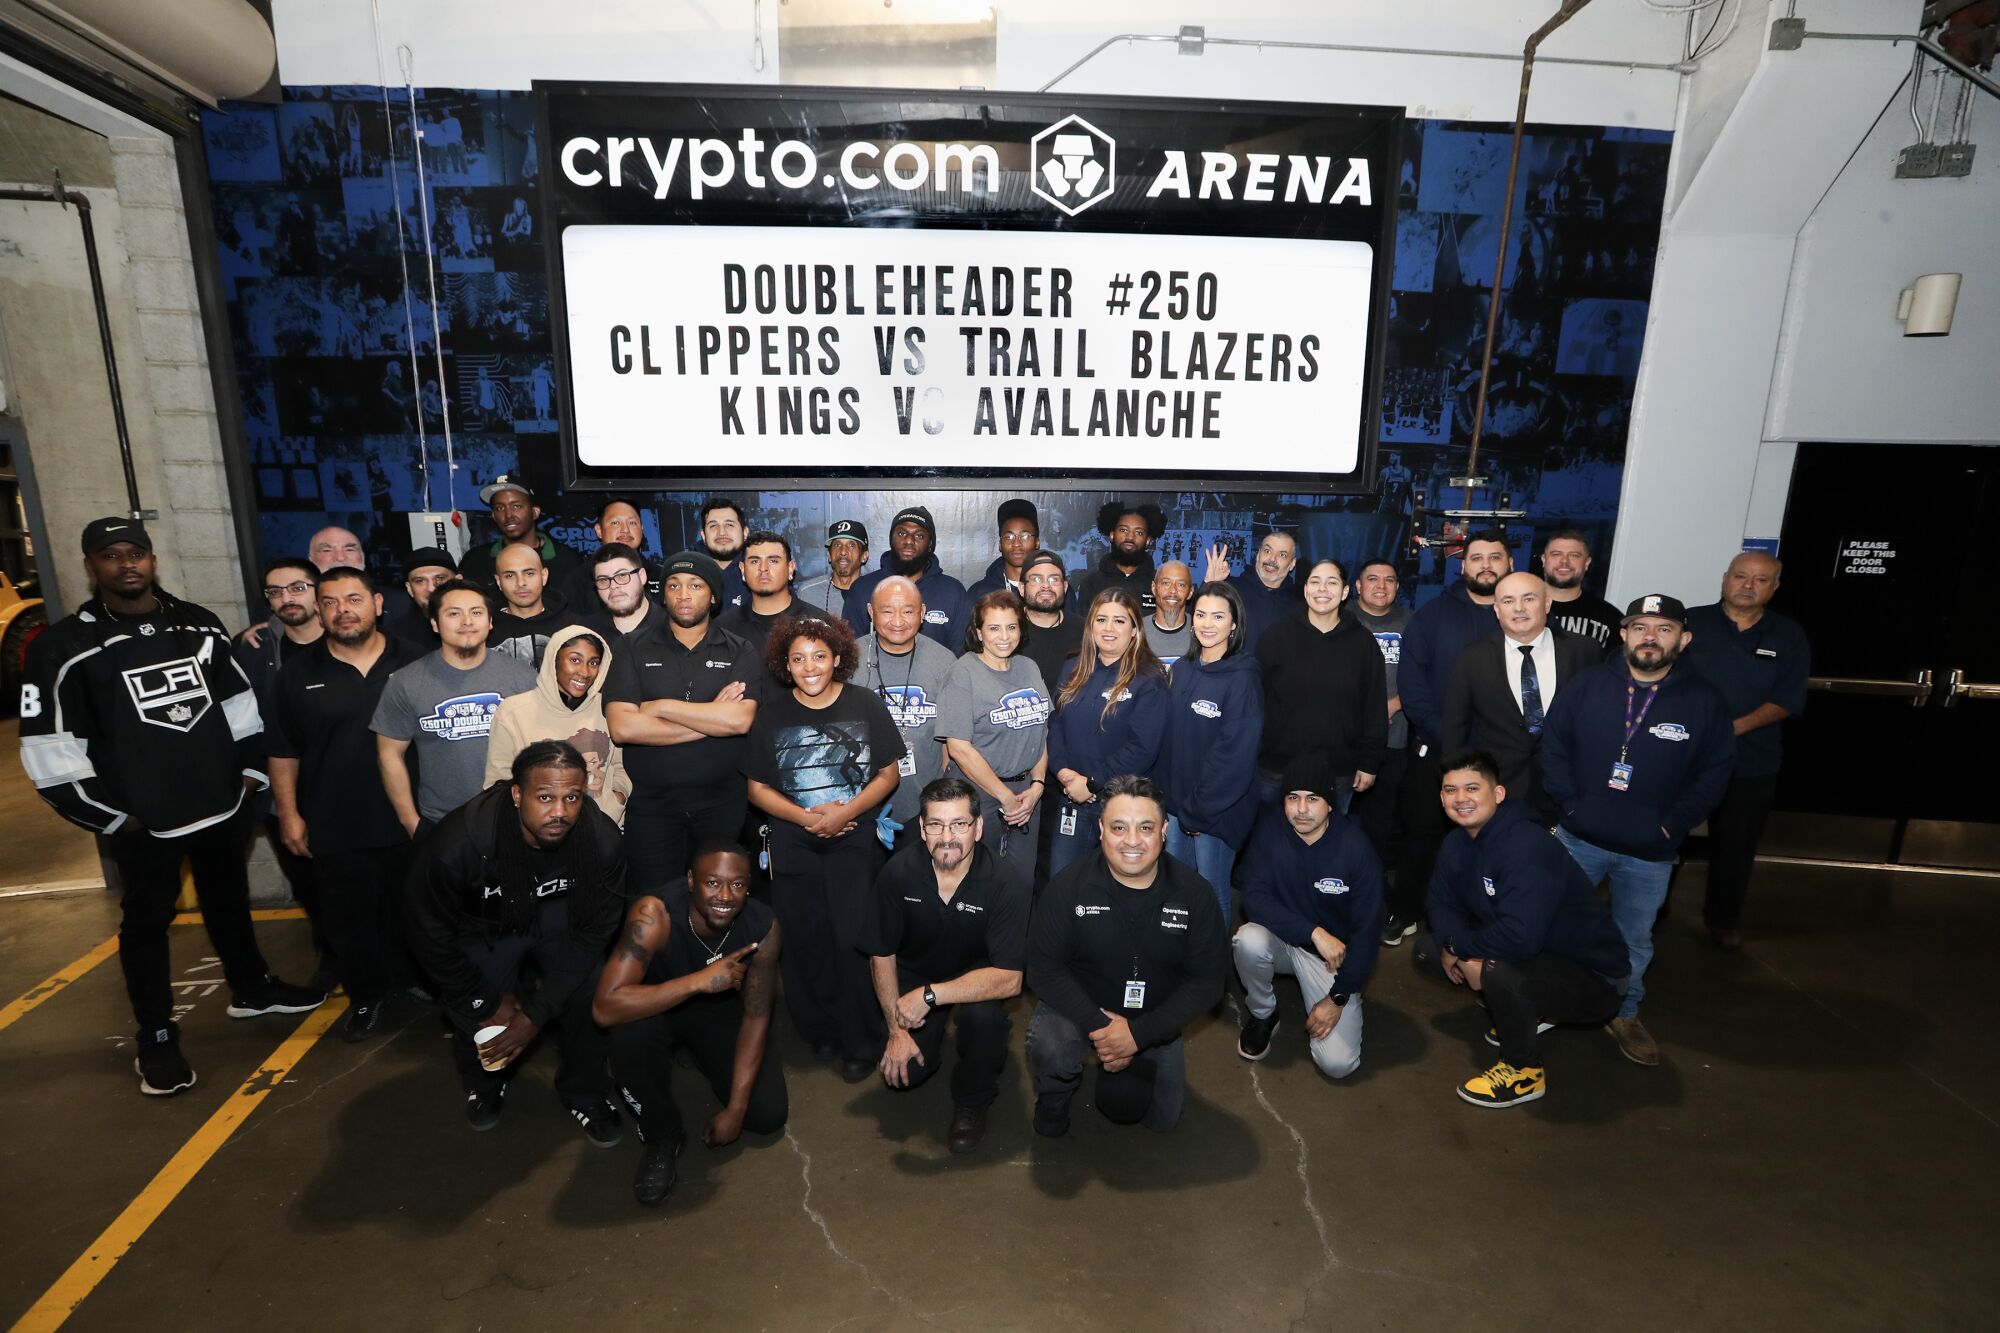 Employees at Crypto.com Arena gather for a team photo